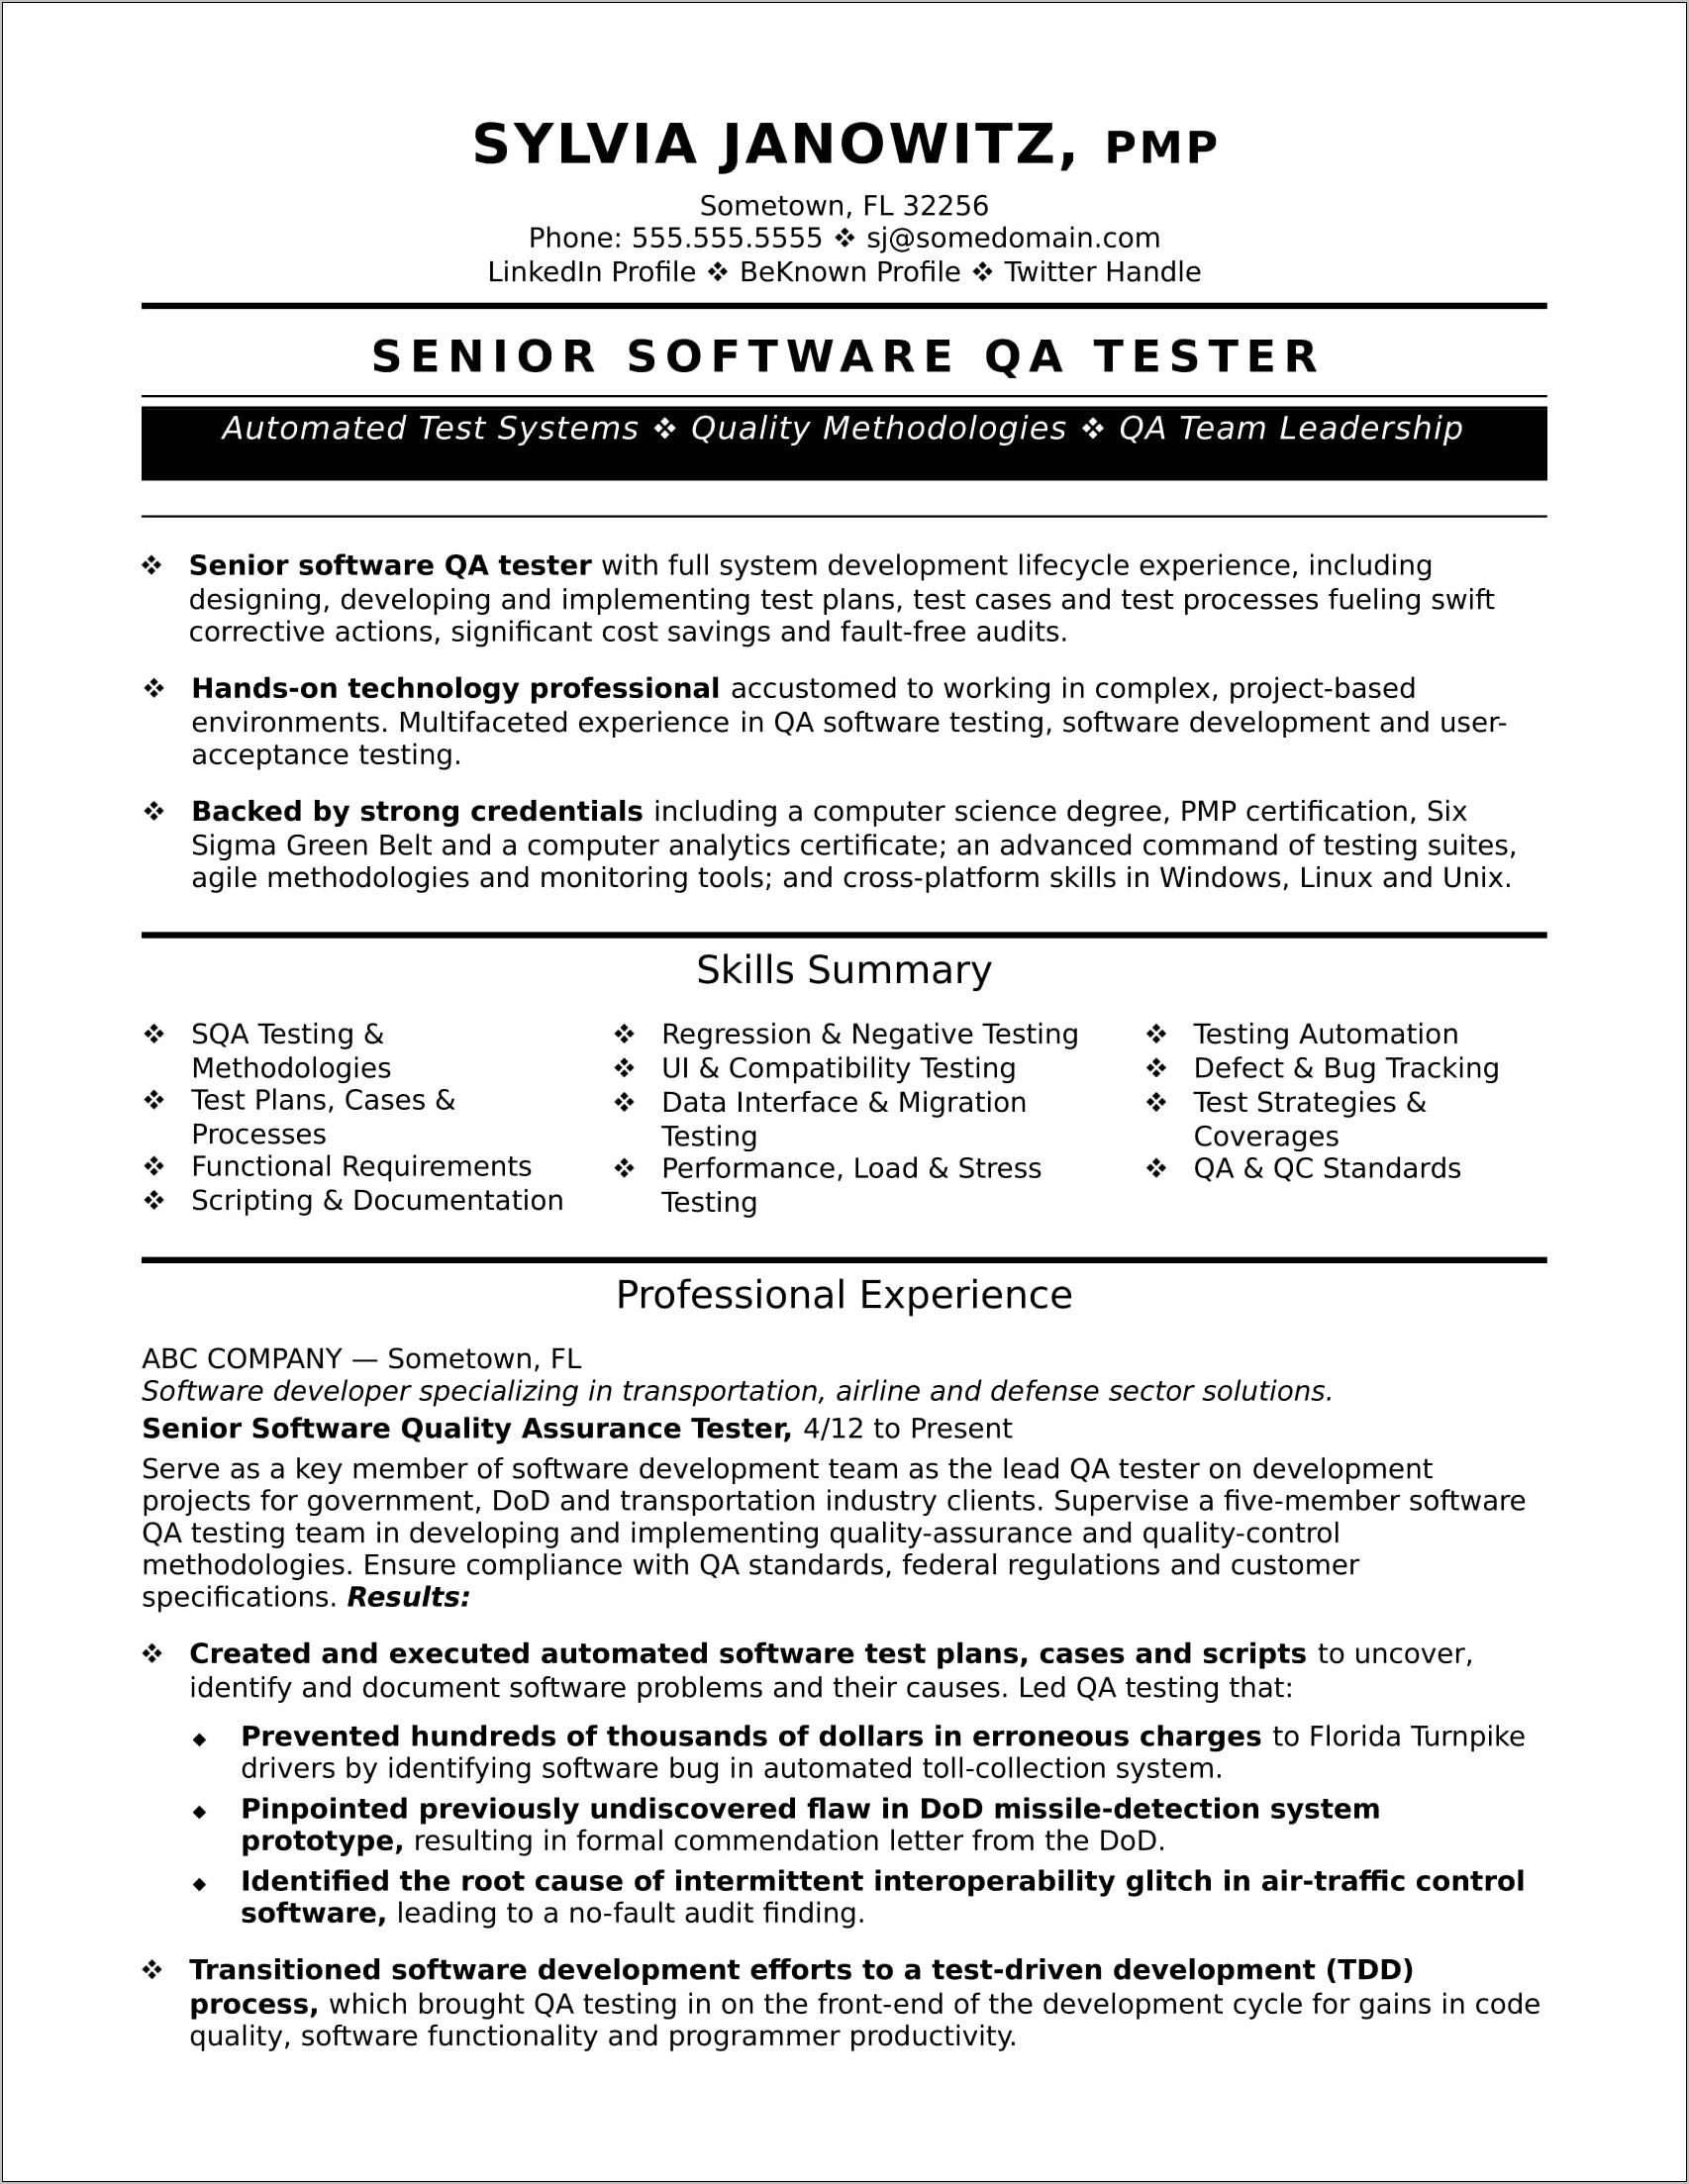 Manual Testing Sample Resume For 4 Years Experience